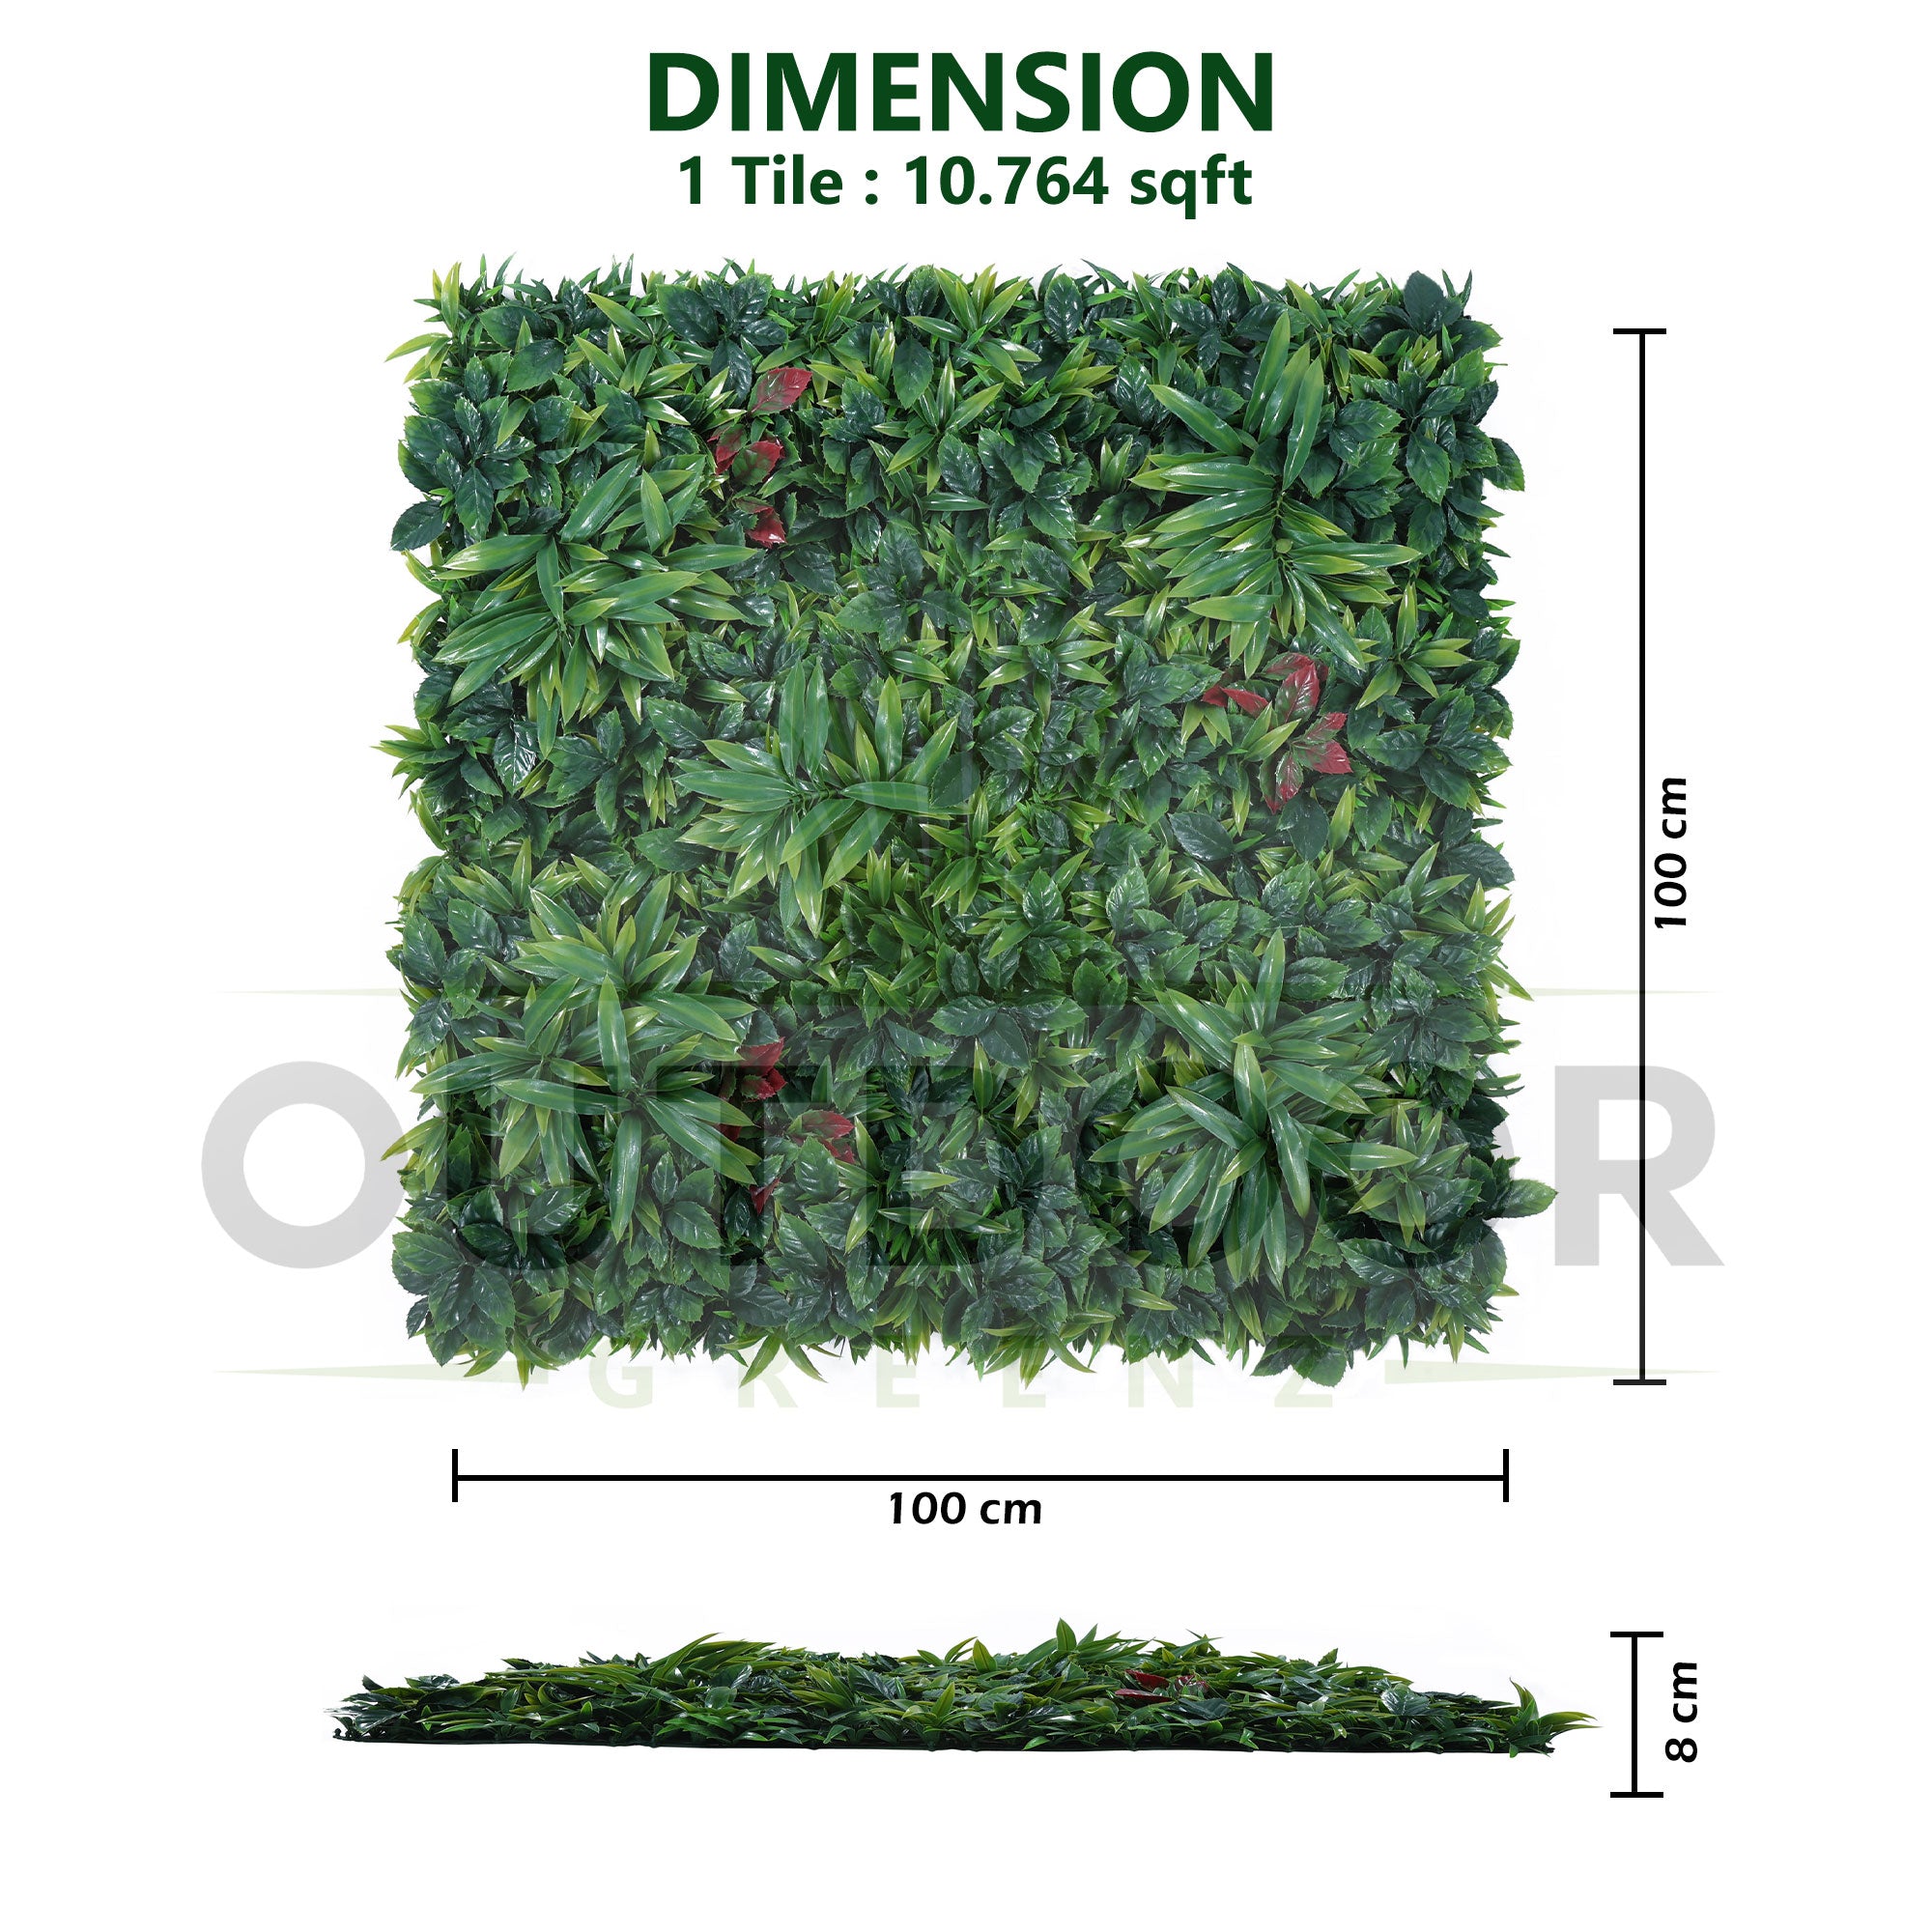 Red and Green Mix Leaves Vertical Garden Wall Tile (Size: 100cm x 100cm, Pack of 1)